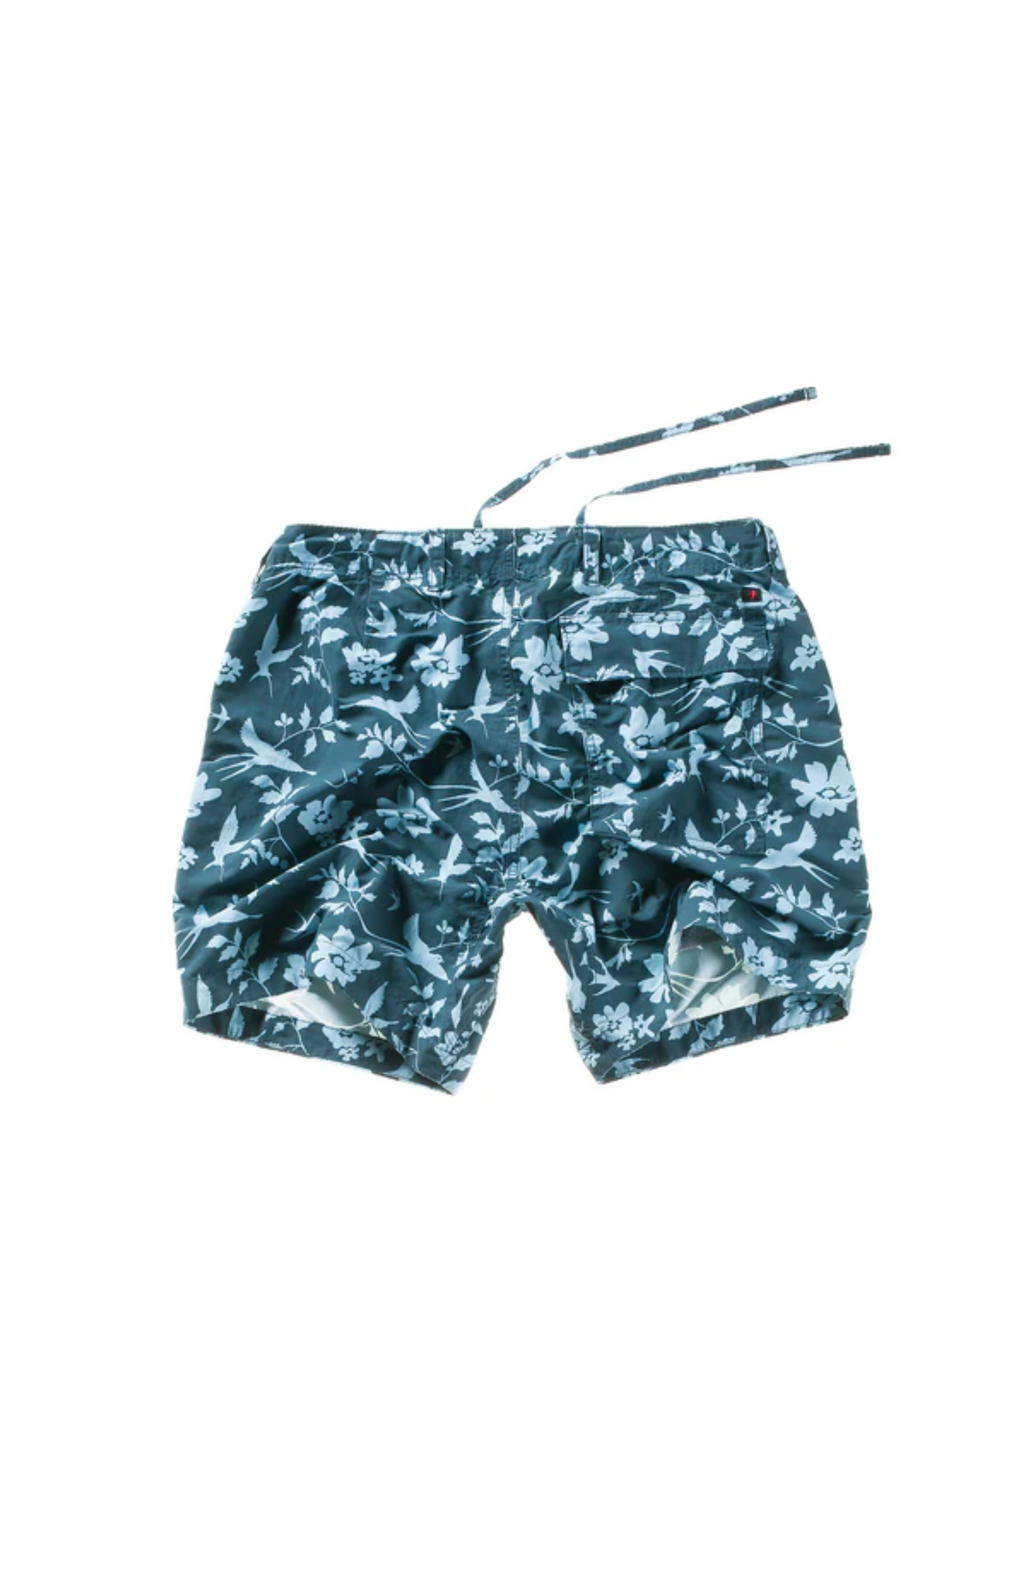 Relwen - Graphic Paddle Short